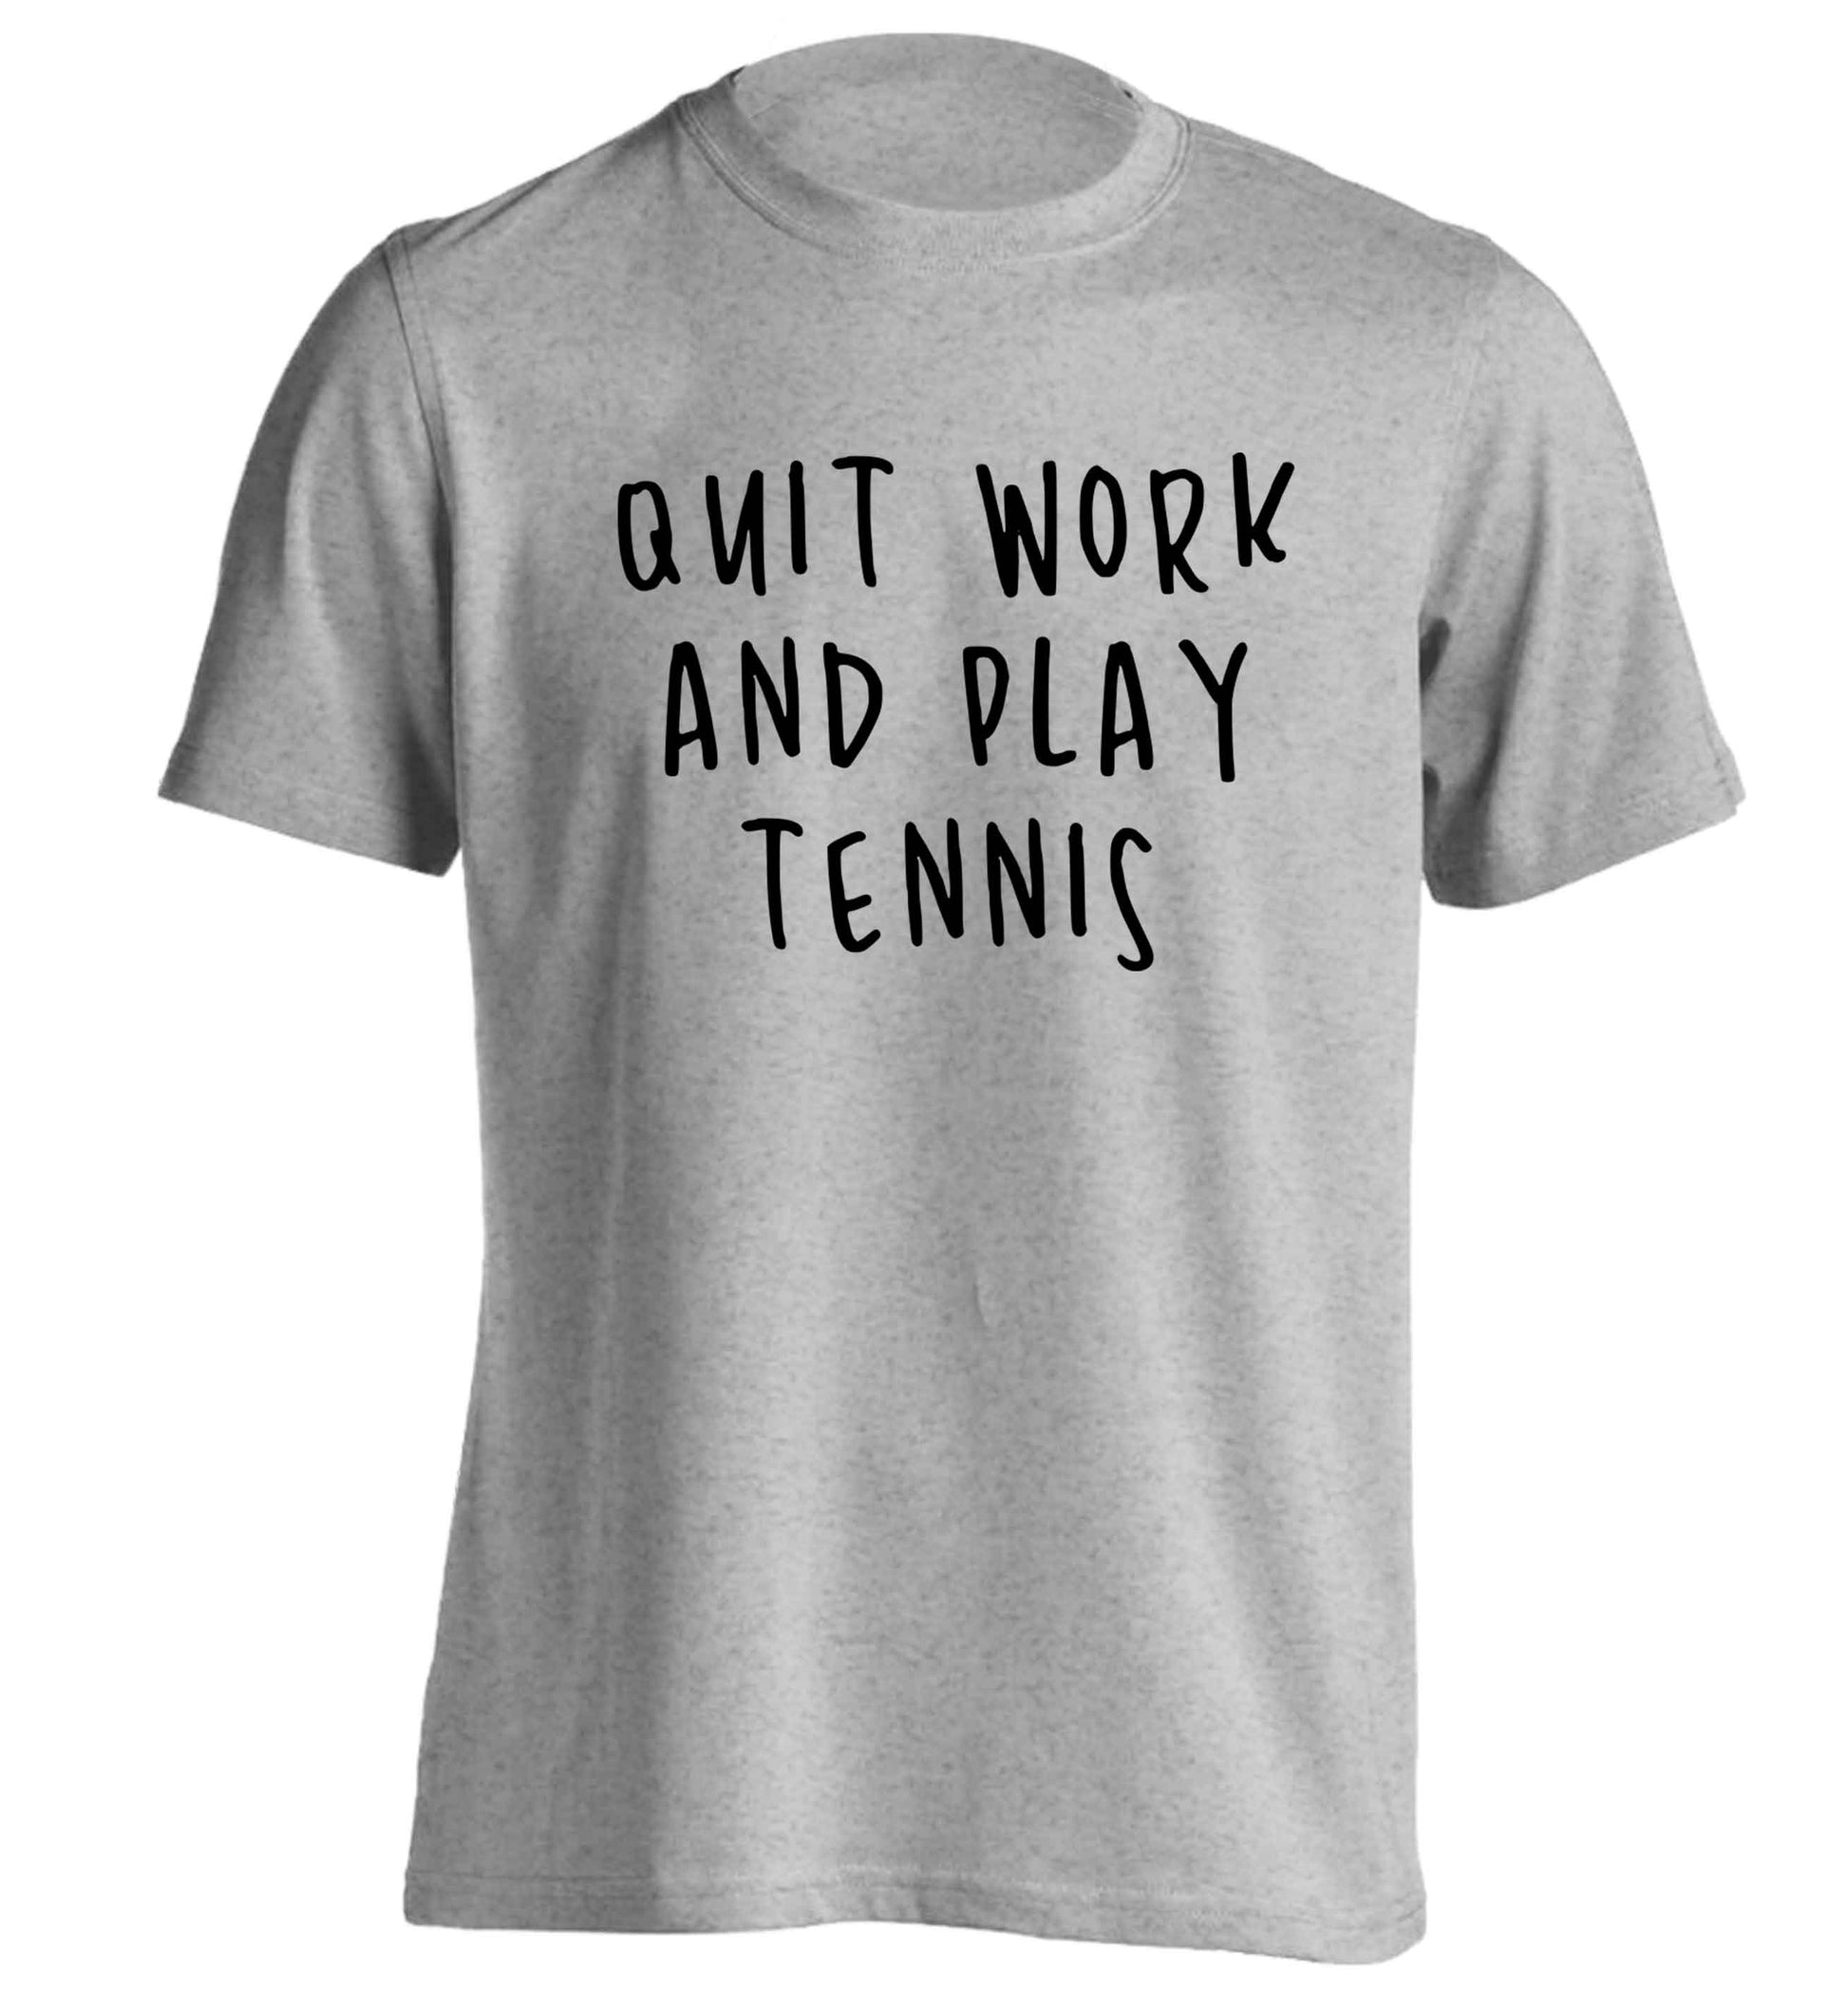 Quit work and play tennis adults unisex grey Tshirt 2XL